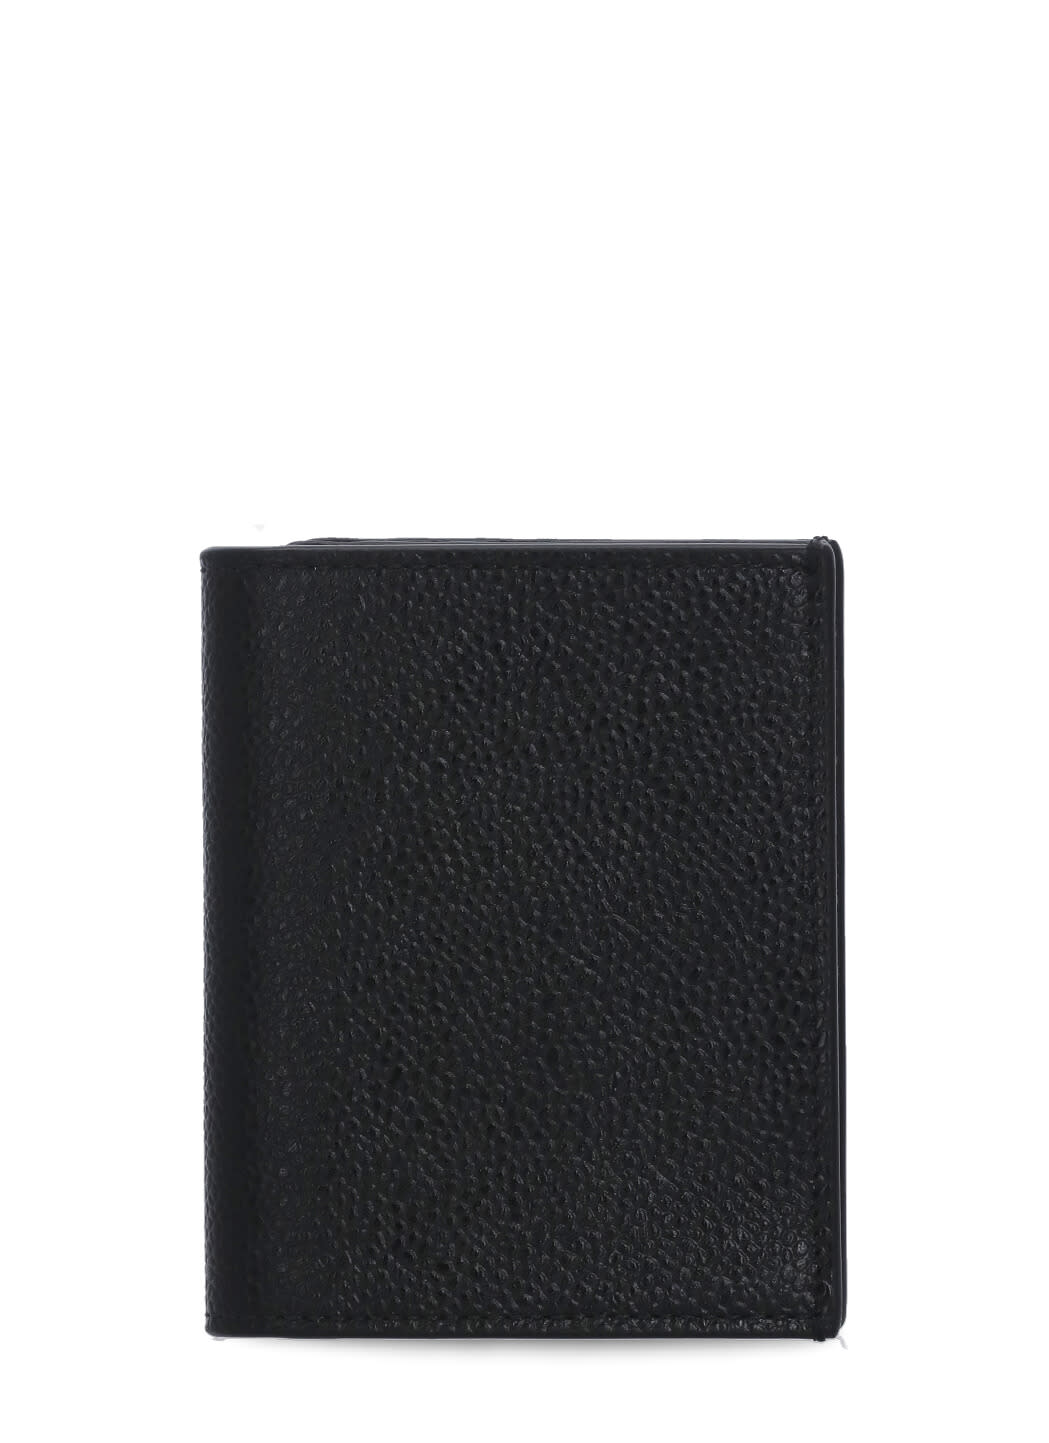 Thom Browne 4 Bar Double Card Holder